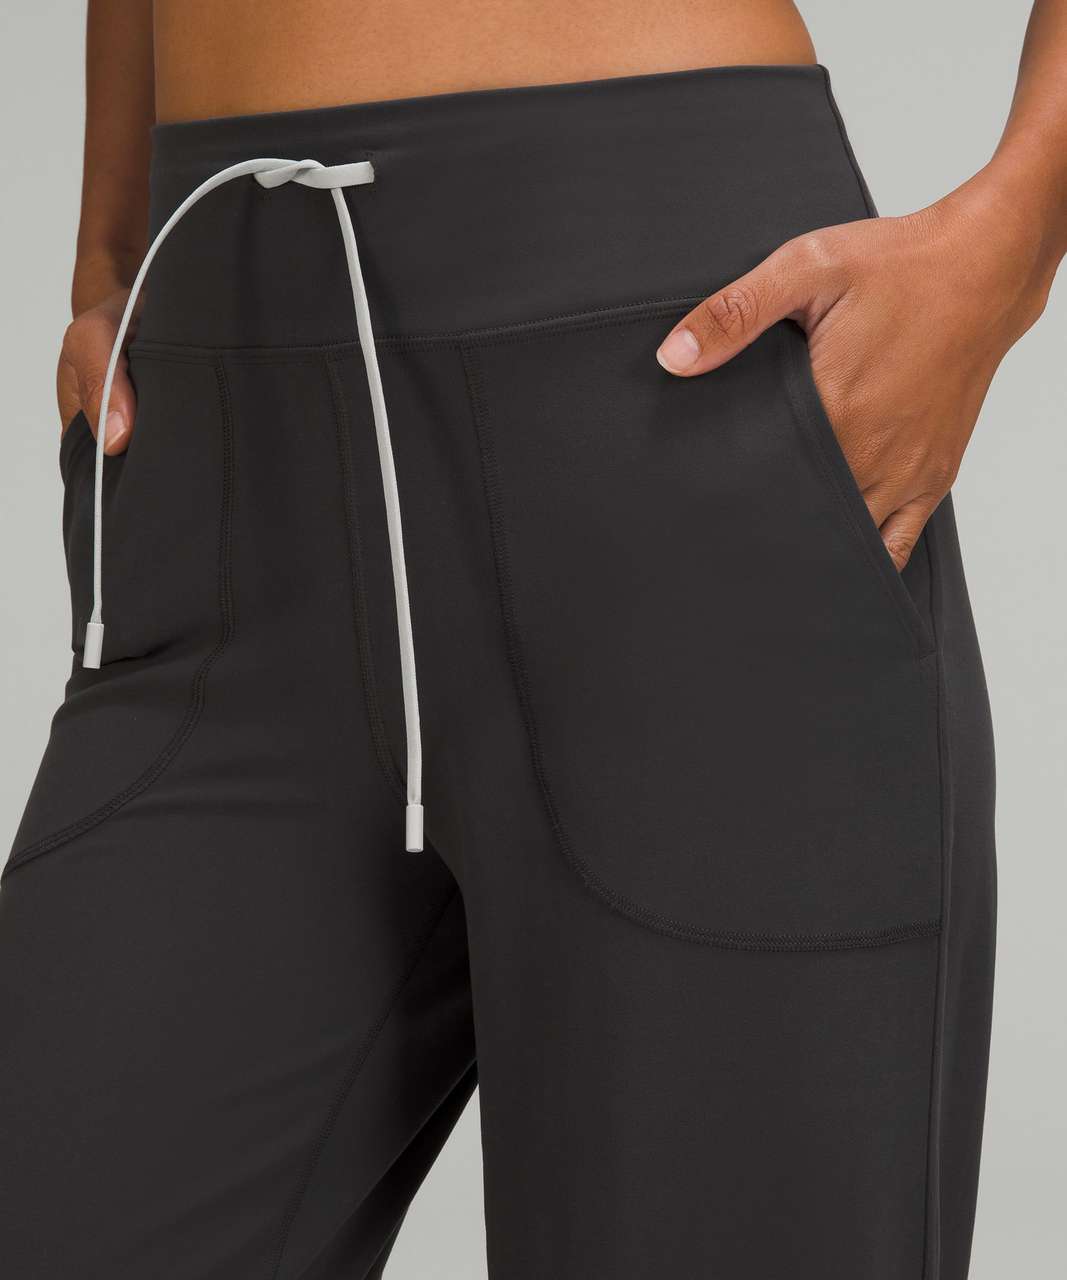 Throwback Astro pant graphite grey/black review and comparison with Groove  pant and bonus very-old Groove pant : r/lululemon